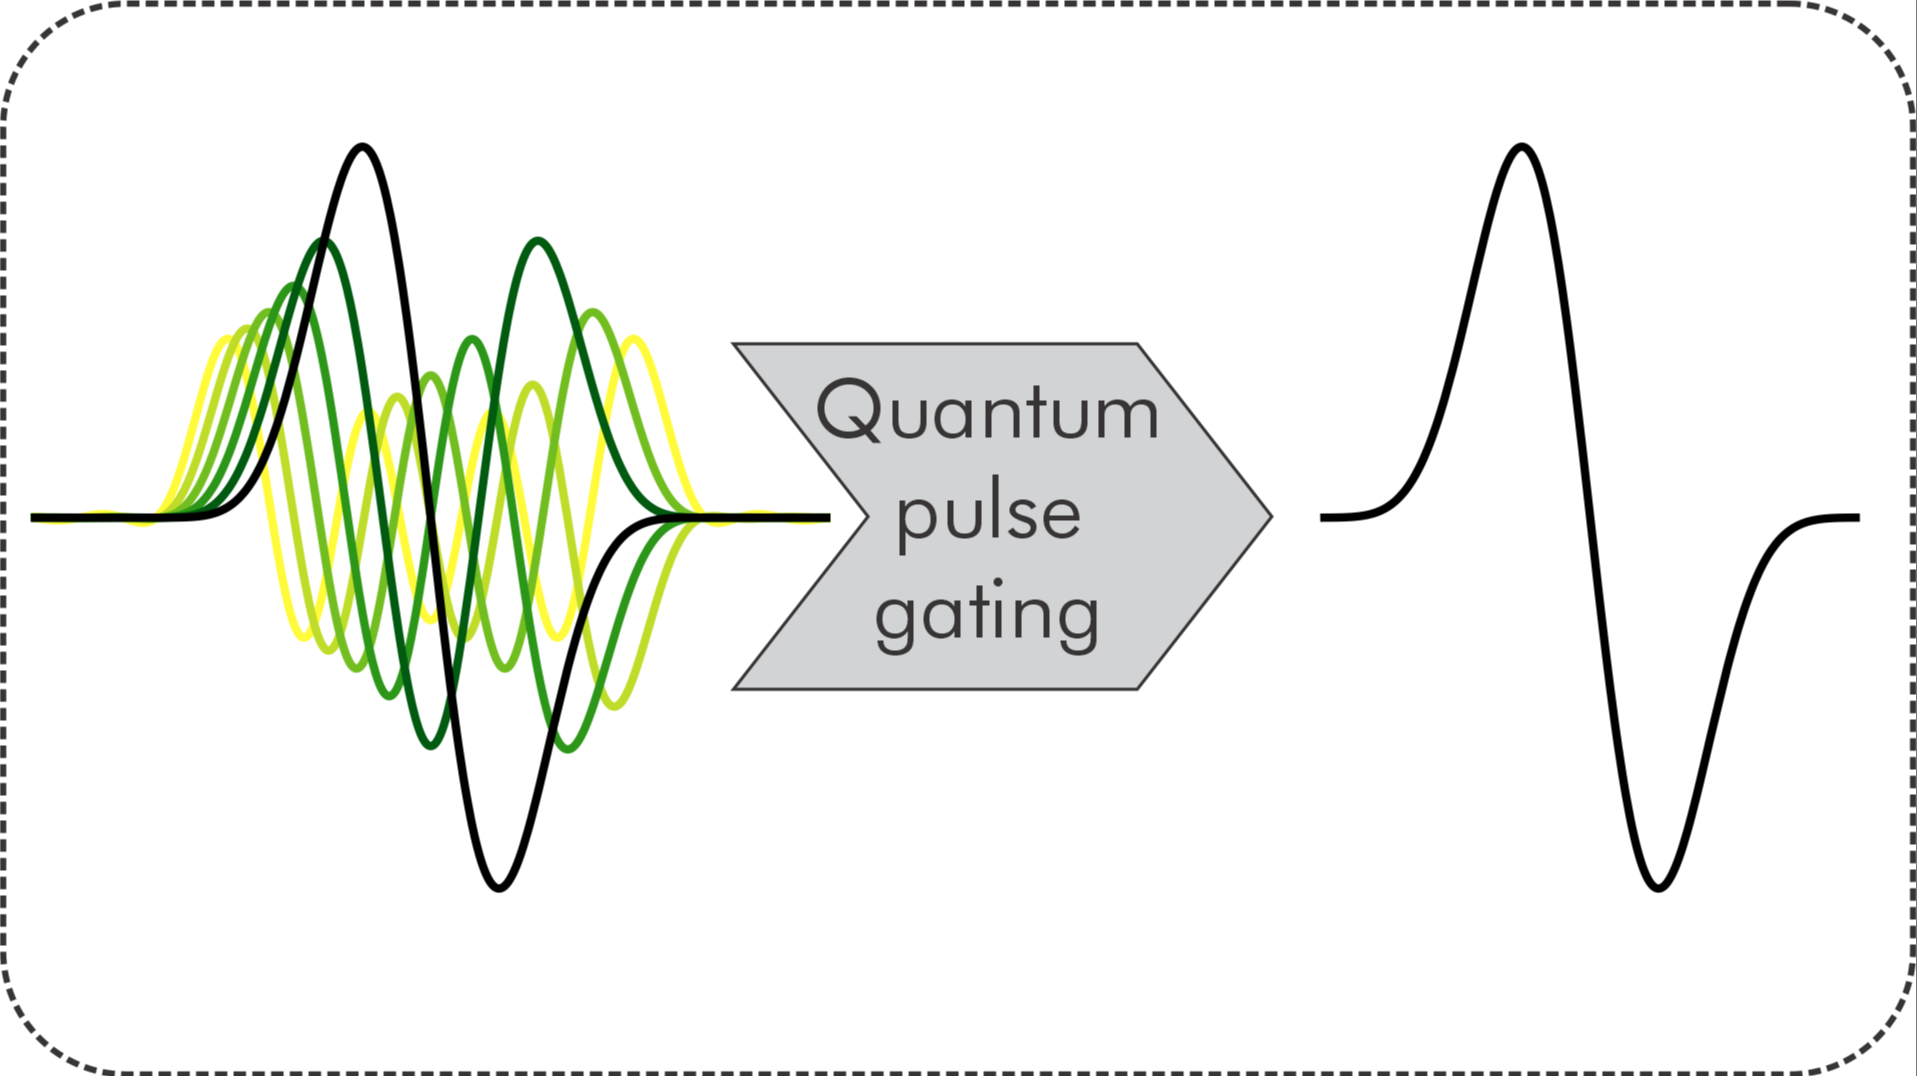 Noise rejection in optical communication systems using quantum pulse gating